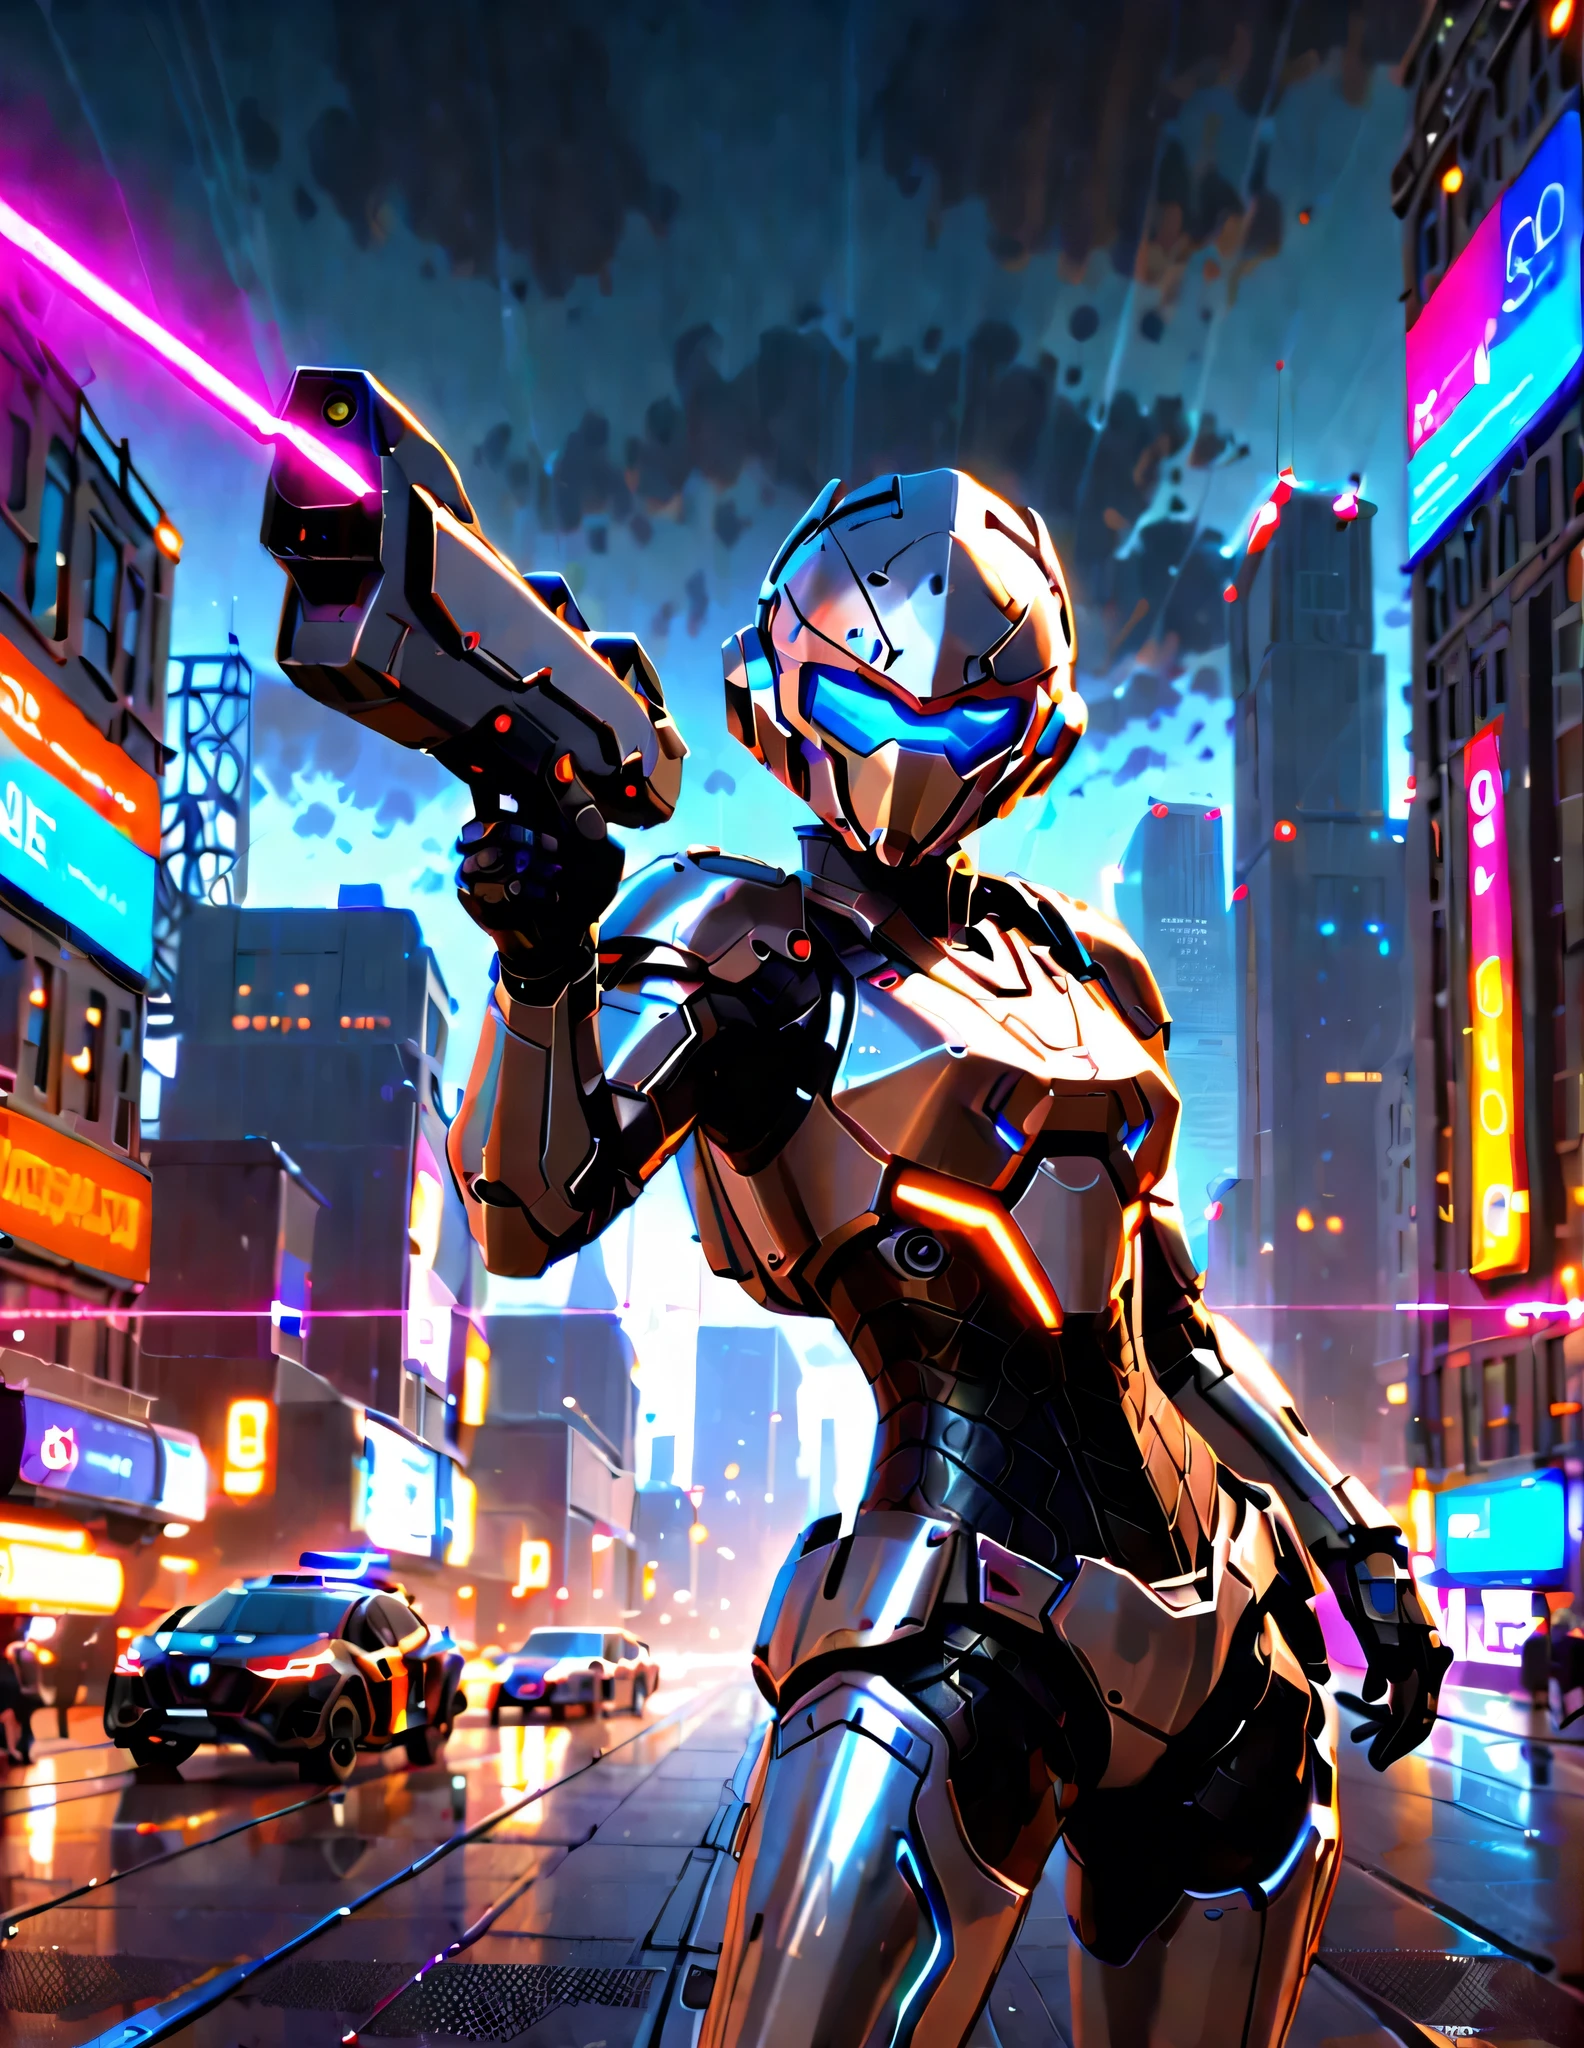 (best quality,4k,8k,highres,masterpiece:1.2),cute, stunning, space police, cyberpunk, neon outfit,extremely detailed eyes,realistic,professional,ultra-fine painting,HDR,vivid colors,bokeh,portrait,landscape,horror,anime,sci-fi,photography,concept artists,coloful bright,glowing lights,hightlight,sparkling effects,sleek design,advanced technology,high-tech gadgets,powerful energy,intergalactic cityscape,thick smoke,shiny metallic surfaces,nighttime ambiance,energetic pose,confident facial expression,great attention to detail,blurred city lights,colorful neon signs,dystopian futuristic atmosphere,laser weapons,spacecrafts flying overhead,grand scale,deep shadows,impressive backdrops,otherworldly particles and effects,mysterious aura,dynamic composition,crisp details,nano-textured armor,impressive architecture,ethereal glow.